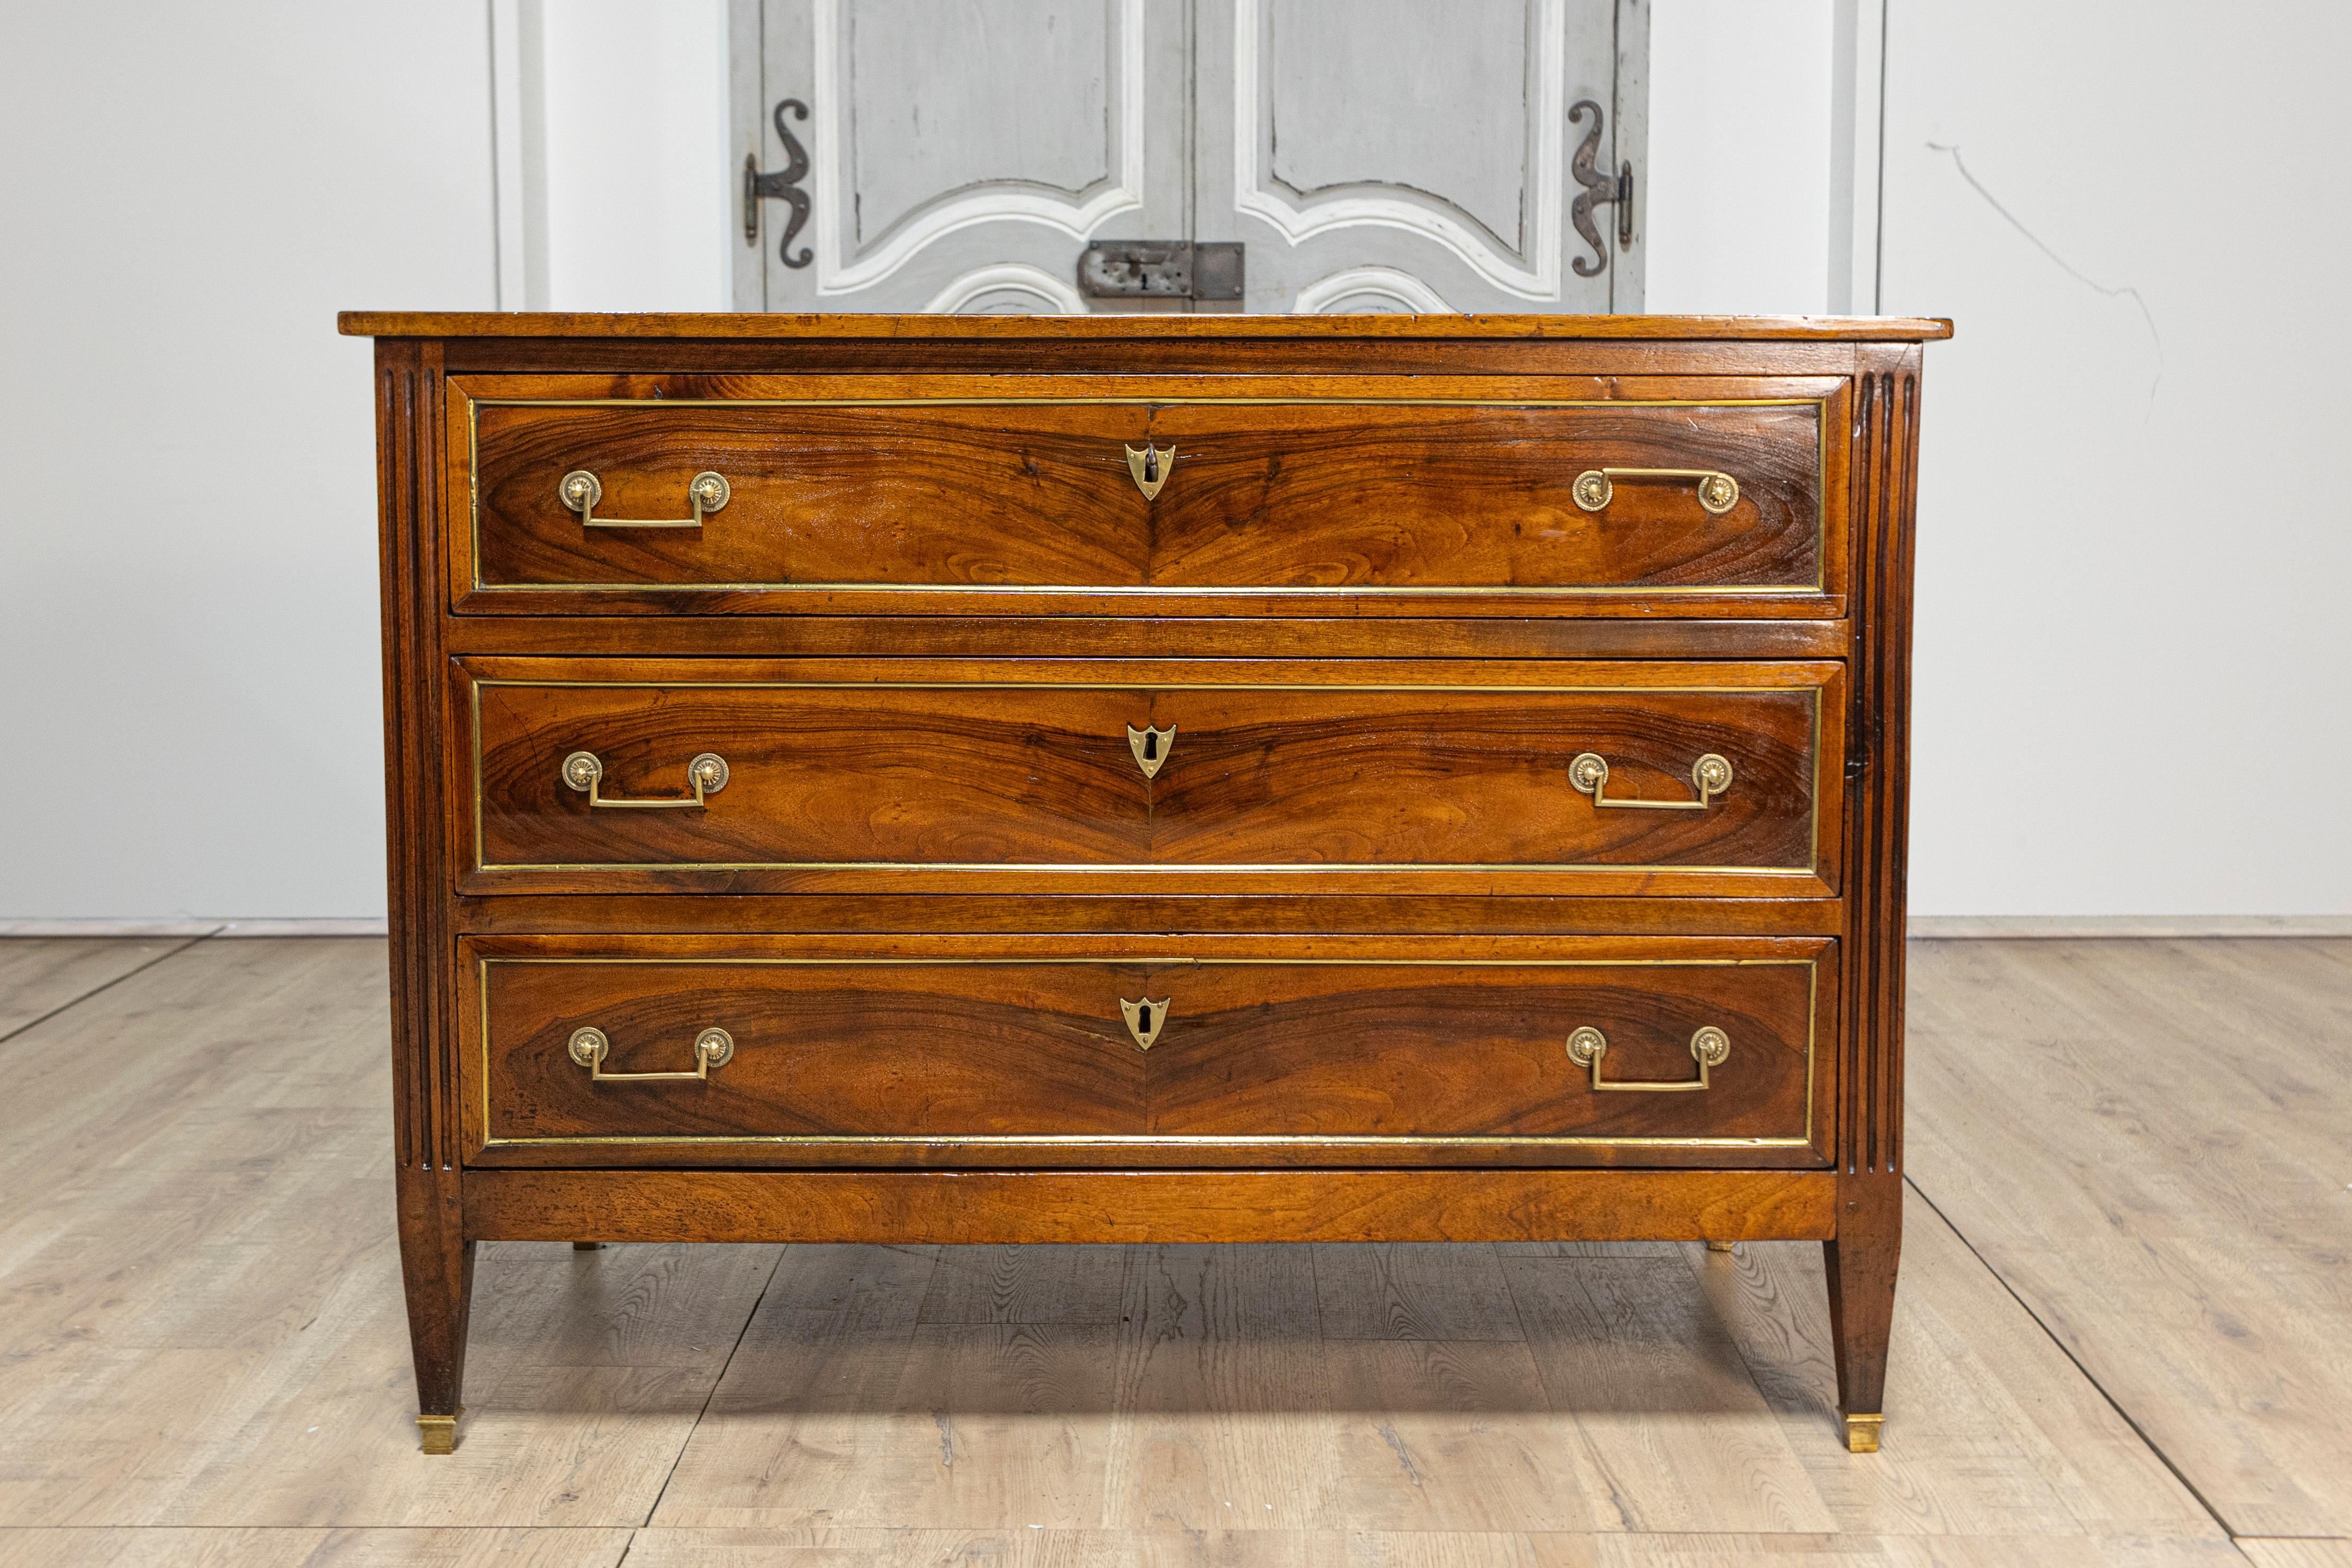 Carved Italian Louis XVI Late 18th Century Walnut Three Drawer Commode with Brass Trim For Sale